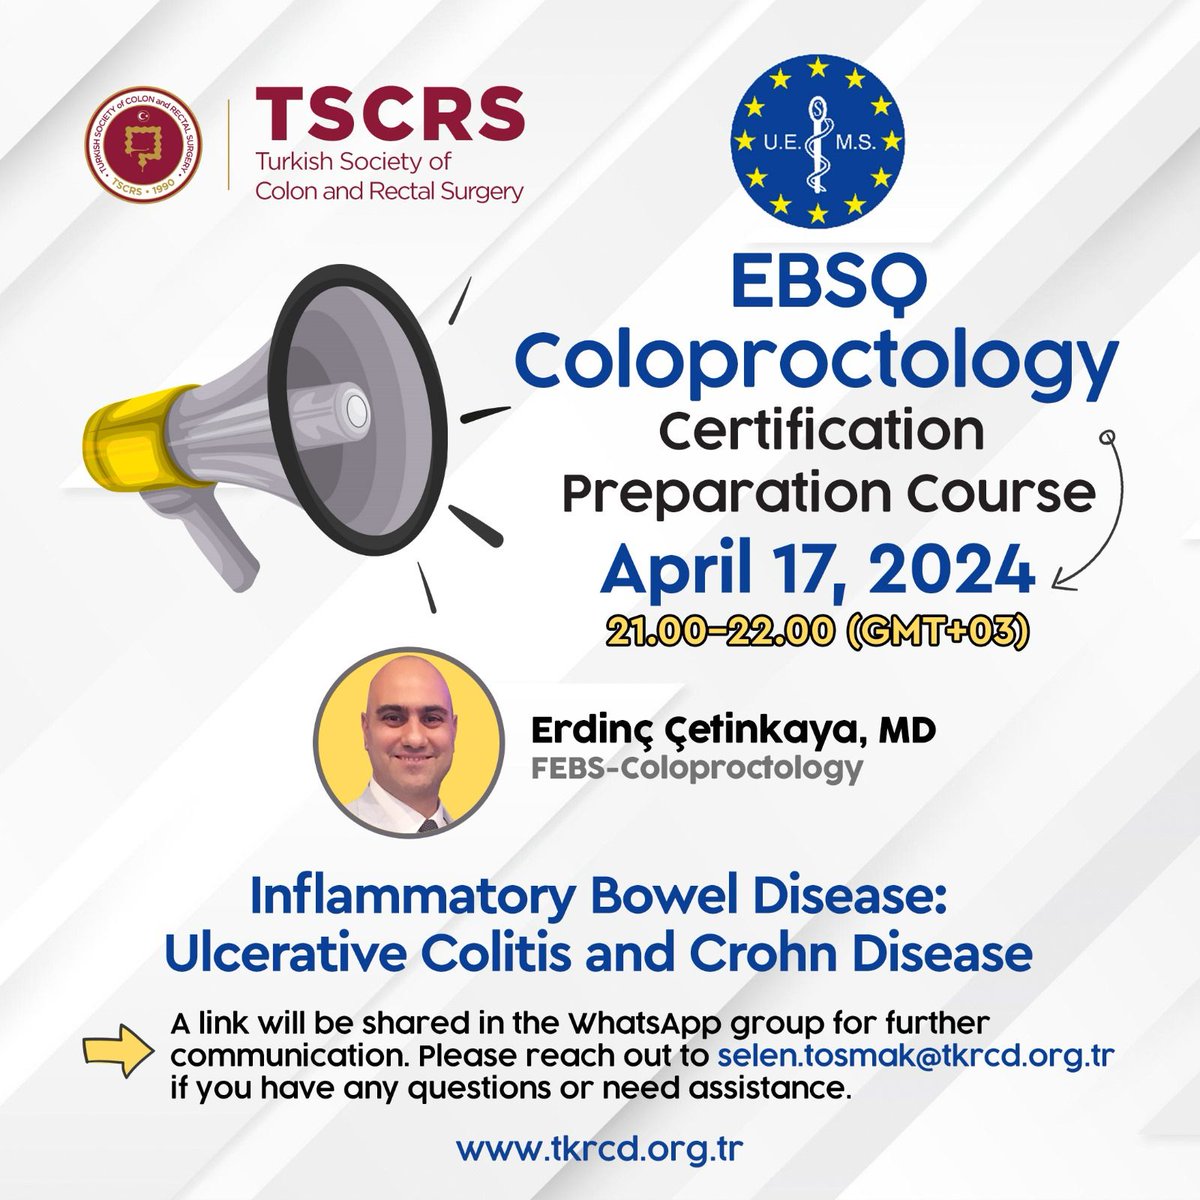 📢 Our EBSQ Coloproctology Certification Preparation Course continues at full speed! 📢April 17, 2024, between 21:00- 22:00 (GMT+3), Dr. Join us for the EBSQ Coloproctology Certification Preparation Course presented by Erdinç Çetinkaya, MD, FEBS-C @drecetinkaya. 🔎Topic:…